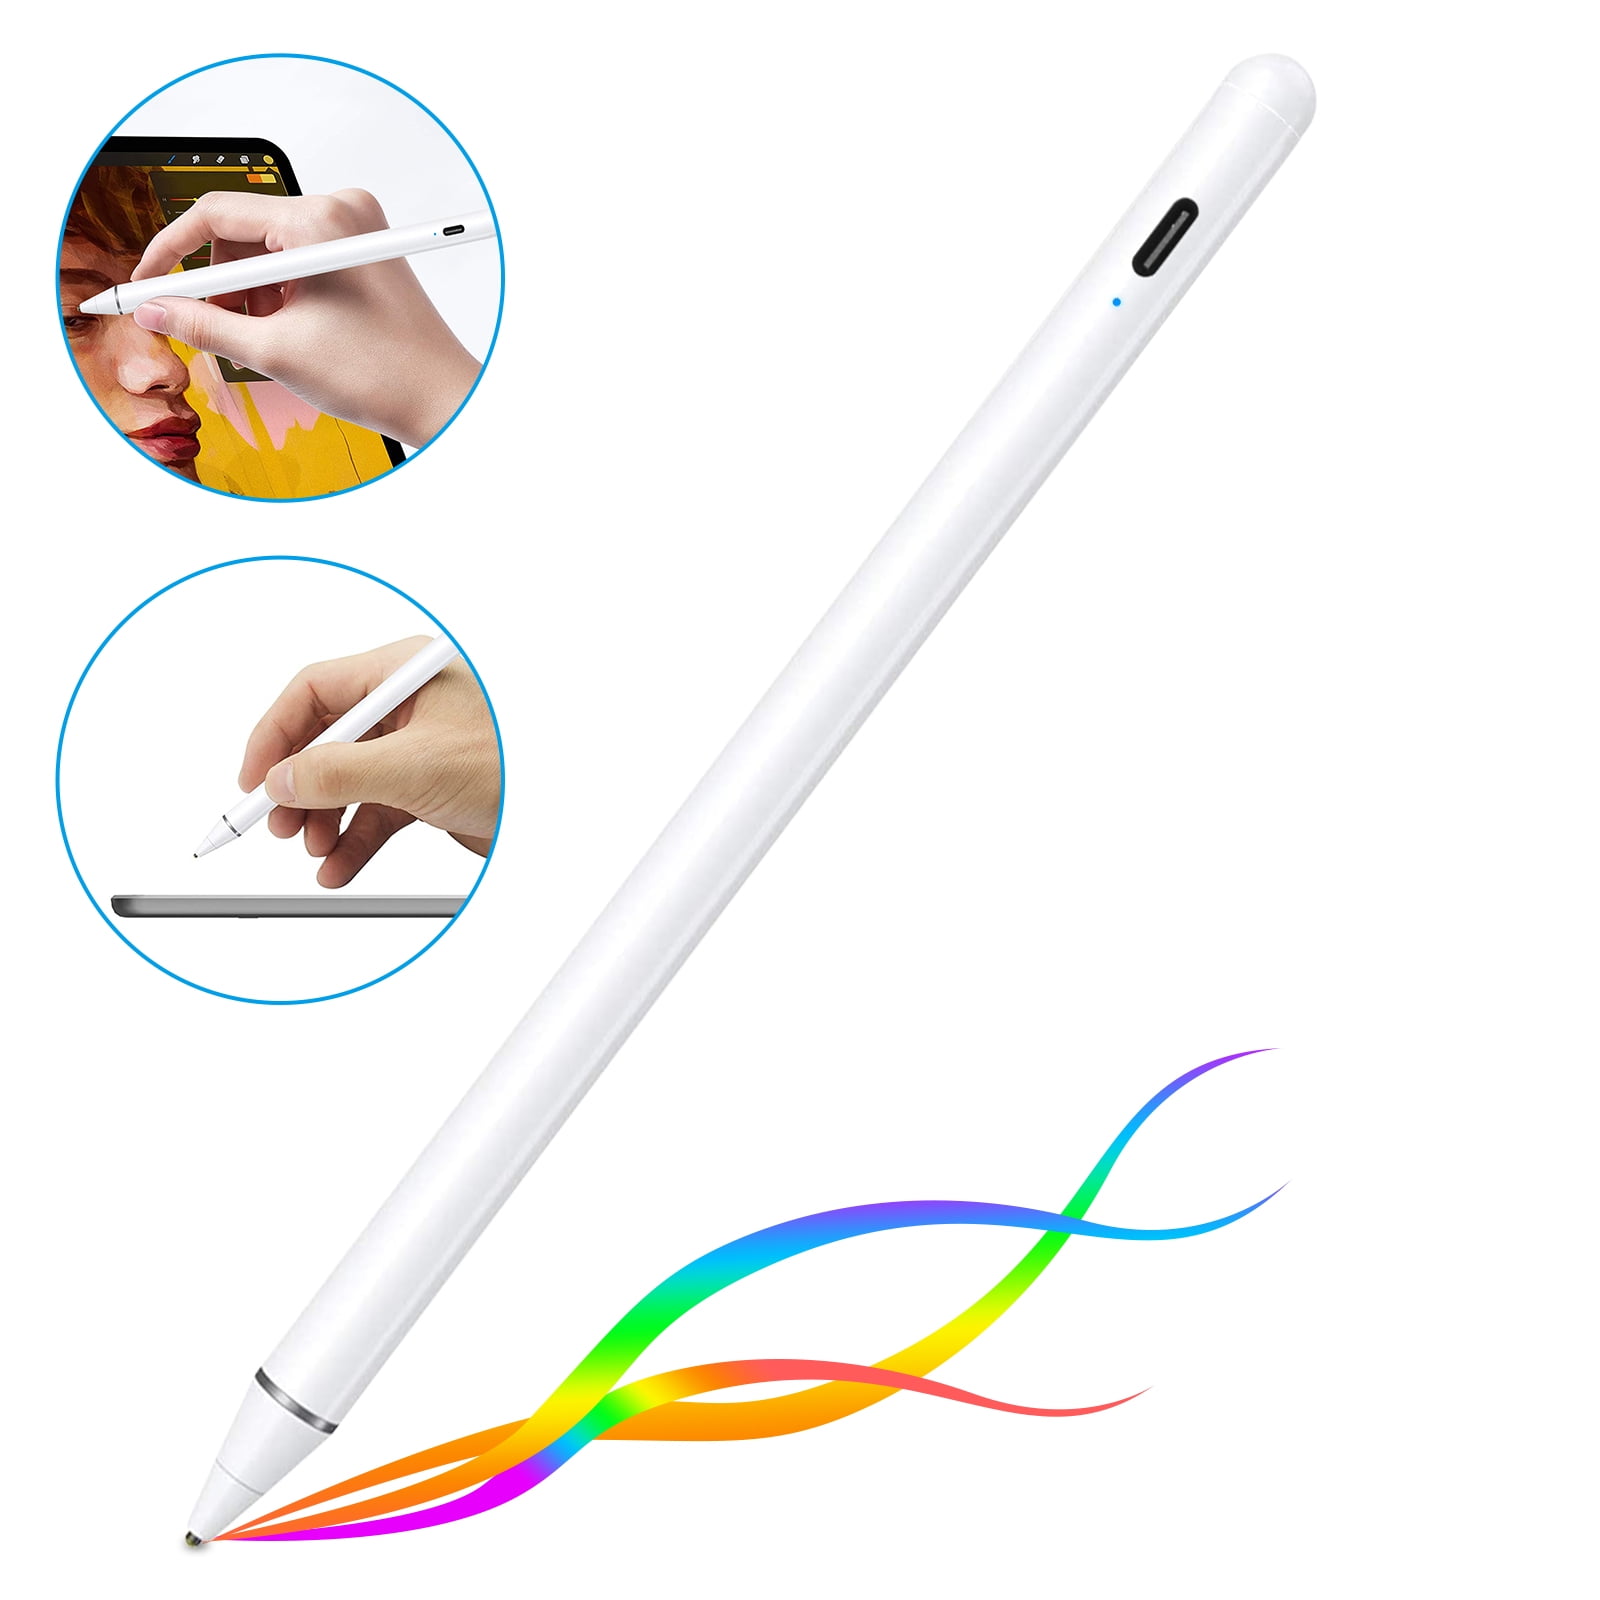 Active Stylus Pen, Fine Point Stylist Pen for All Capacitive Touch Screen Device, Compatible iPad/Pro/Air/Mini, Tablet & Touch Devices, Sensitivity for Writing/Drawing (Black/White) - Walmart.com